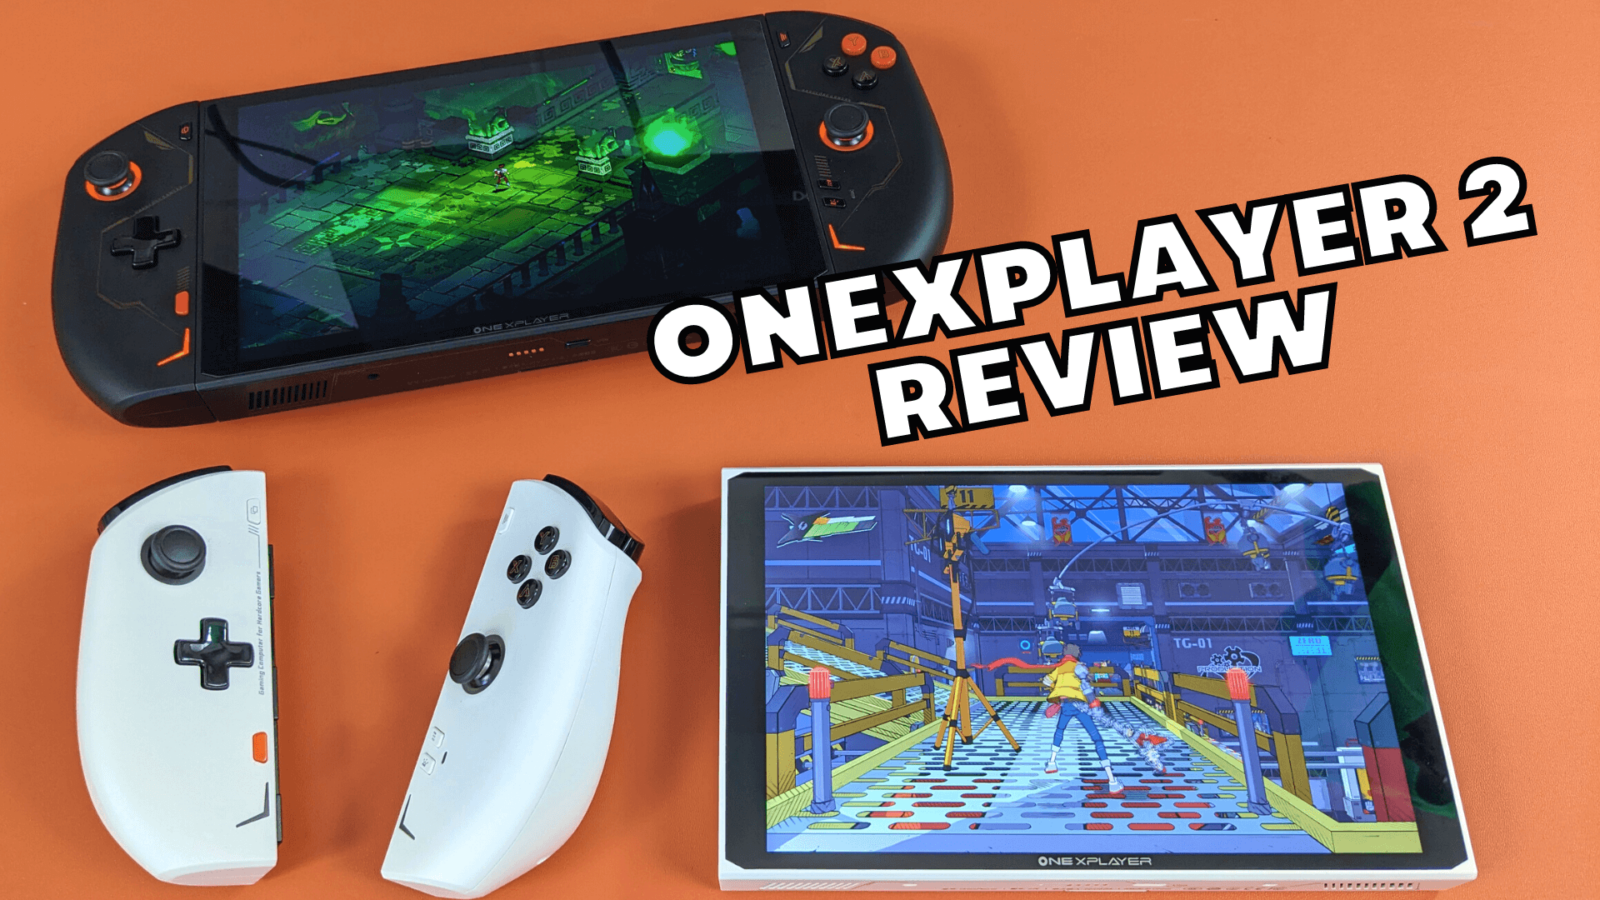 ONEXPLAYER 2 Review - Is this the best handheld gaming PC? - DroiX Blogs